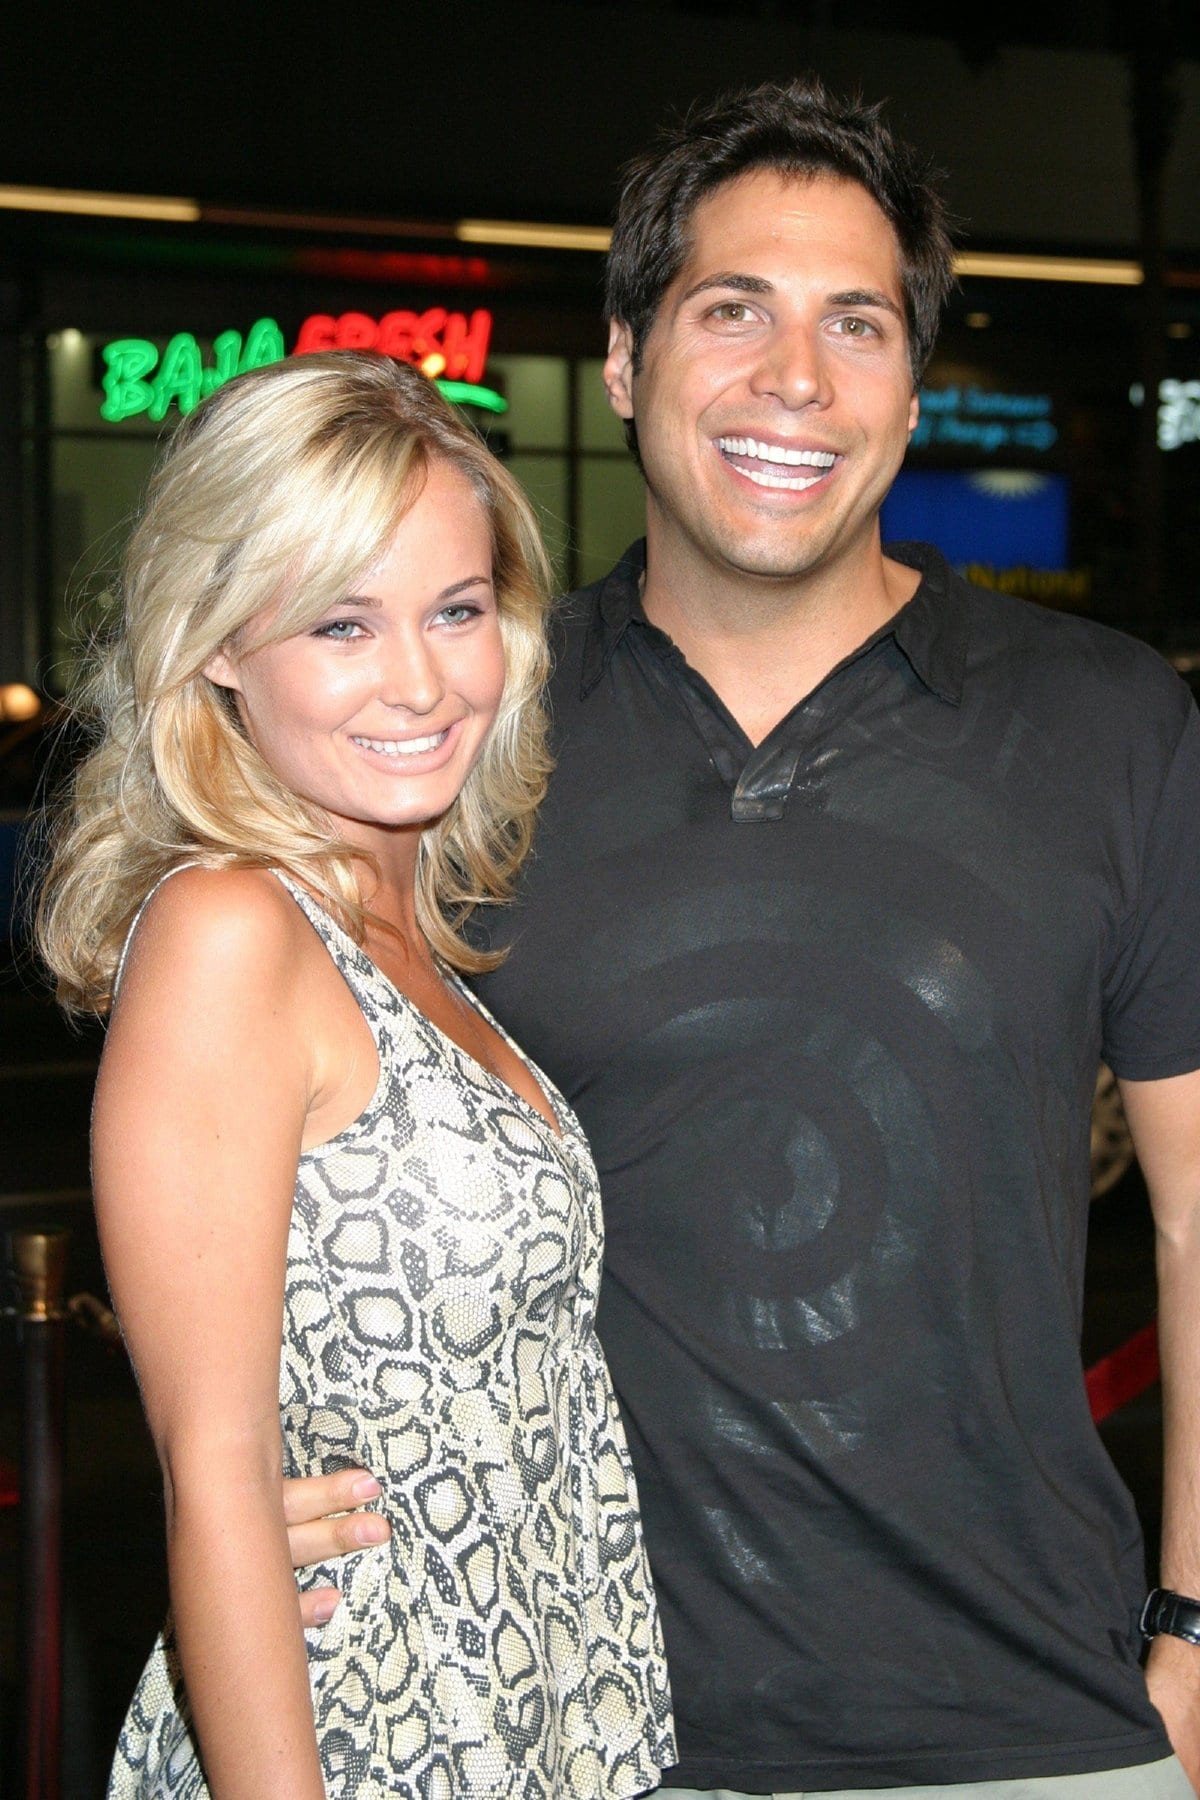 Joe Francis dated blonde actress Amber Hay from 2006 - 2008